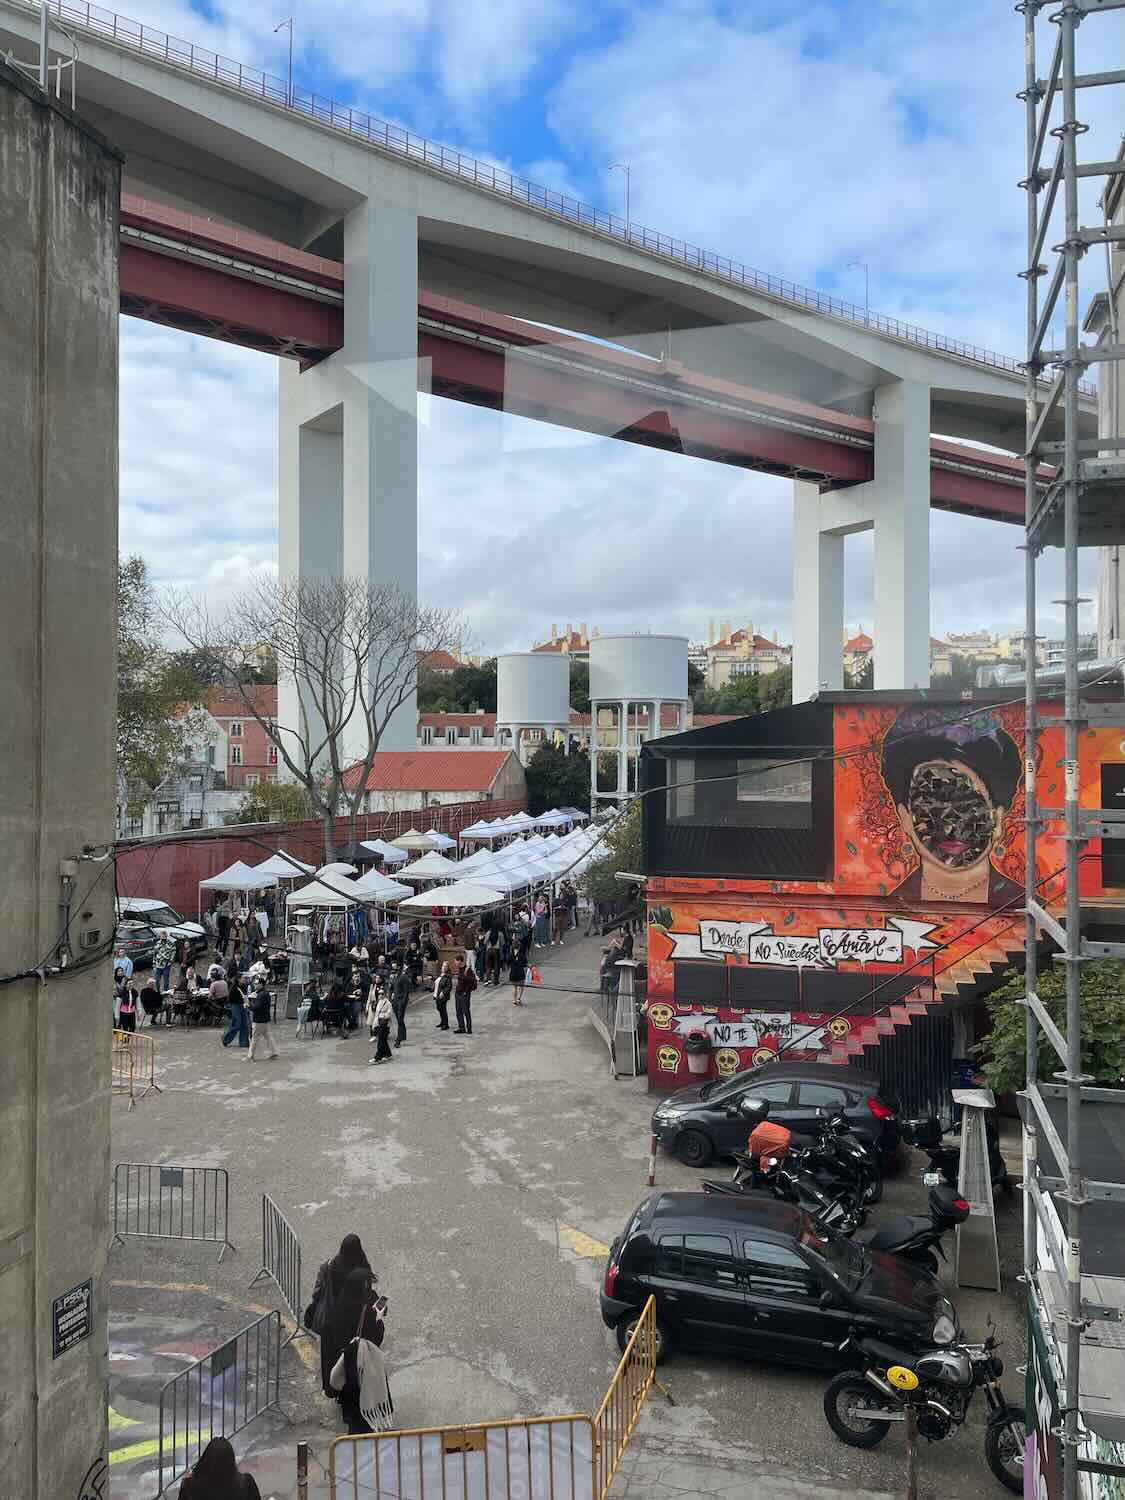 A bustling LX Factory market under the shadow of the overpass in Lisbon, with people exploring stalls and the urban art space, reflecting the city's contemporary culture.